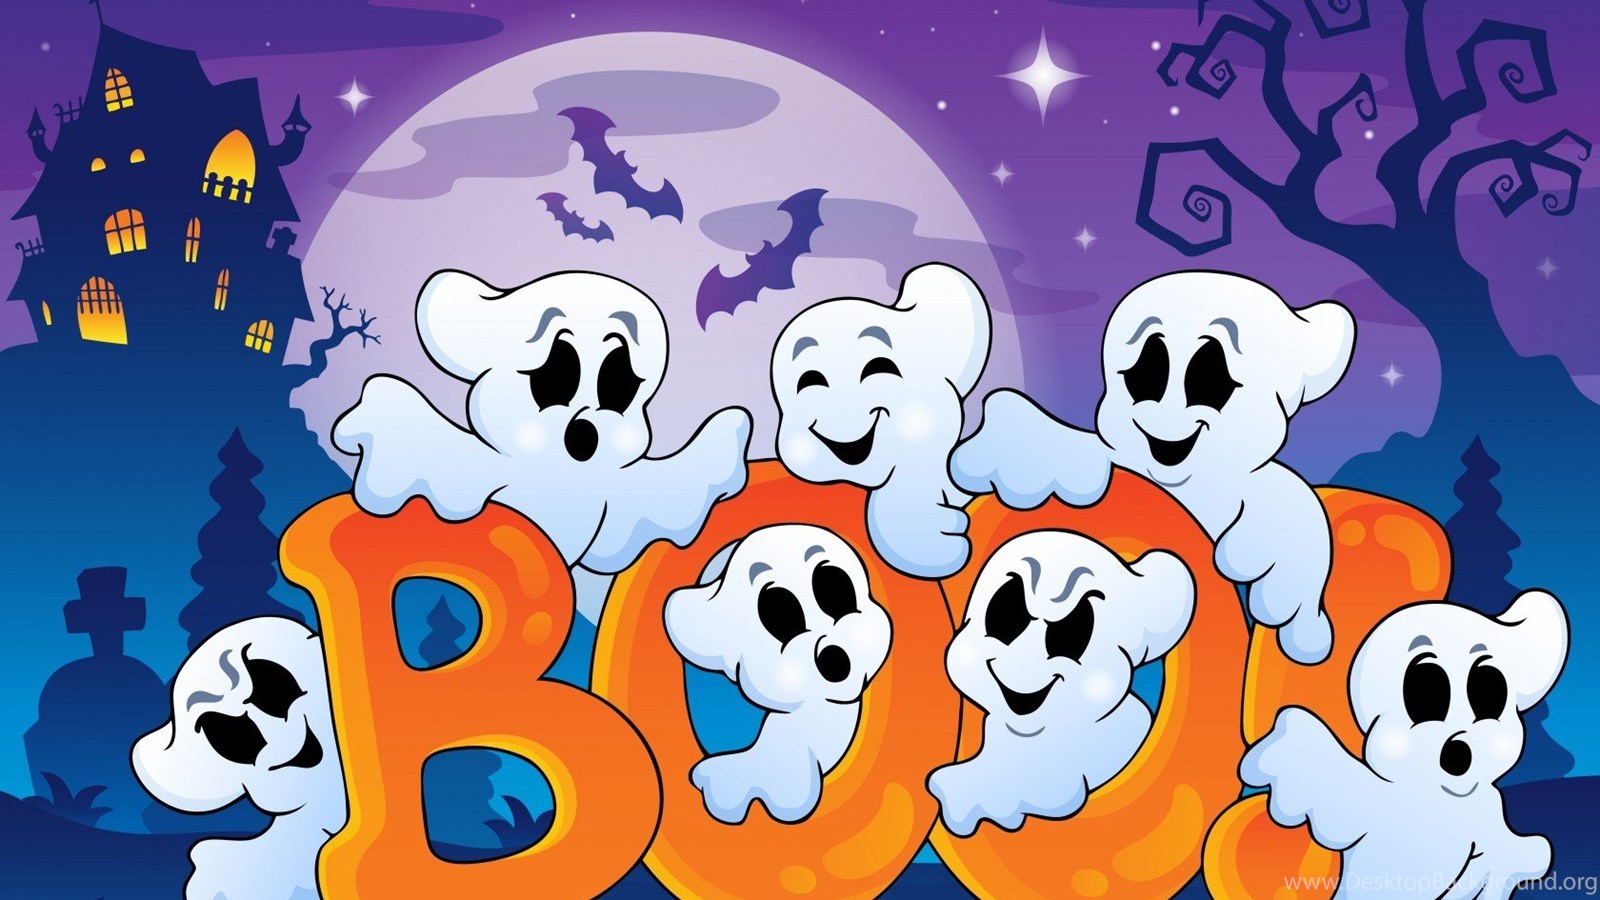 Cute Ghost Wallpaper Also Cute Halloween Ghost Tumblr Together. Desktop Background